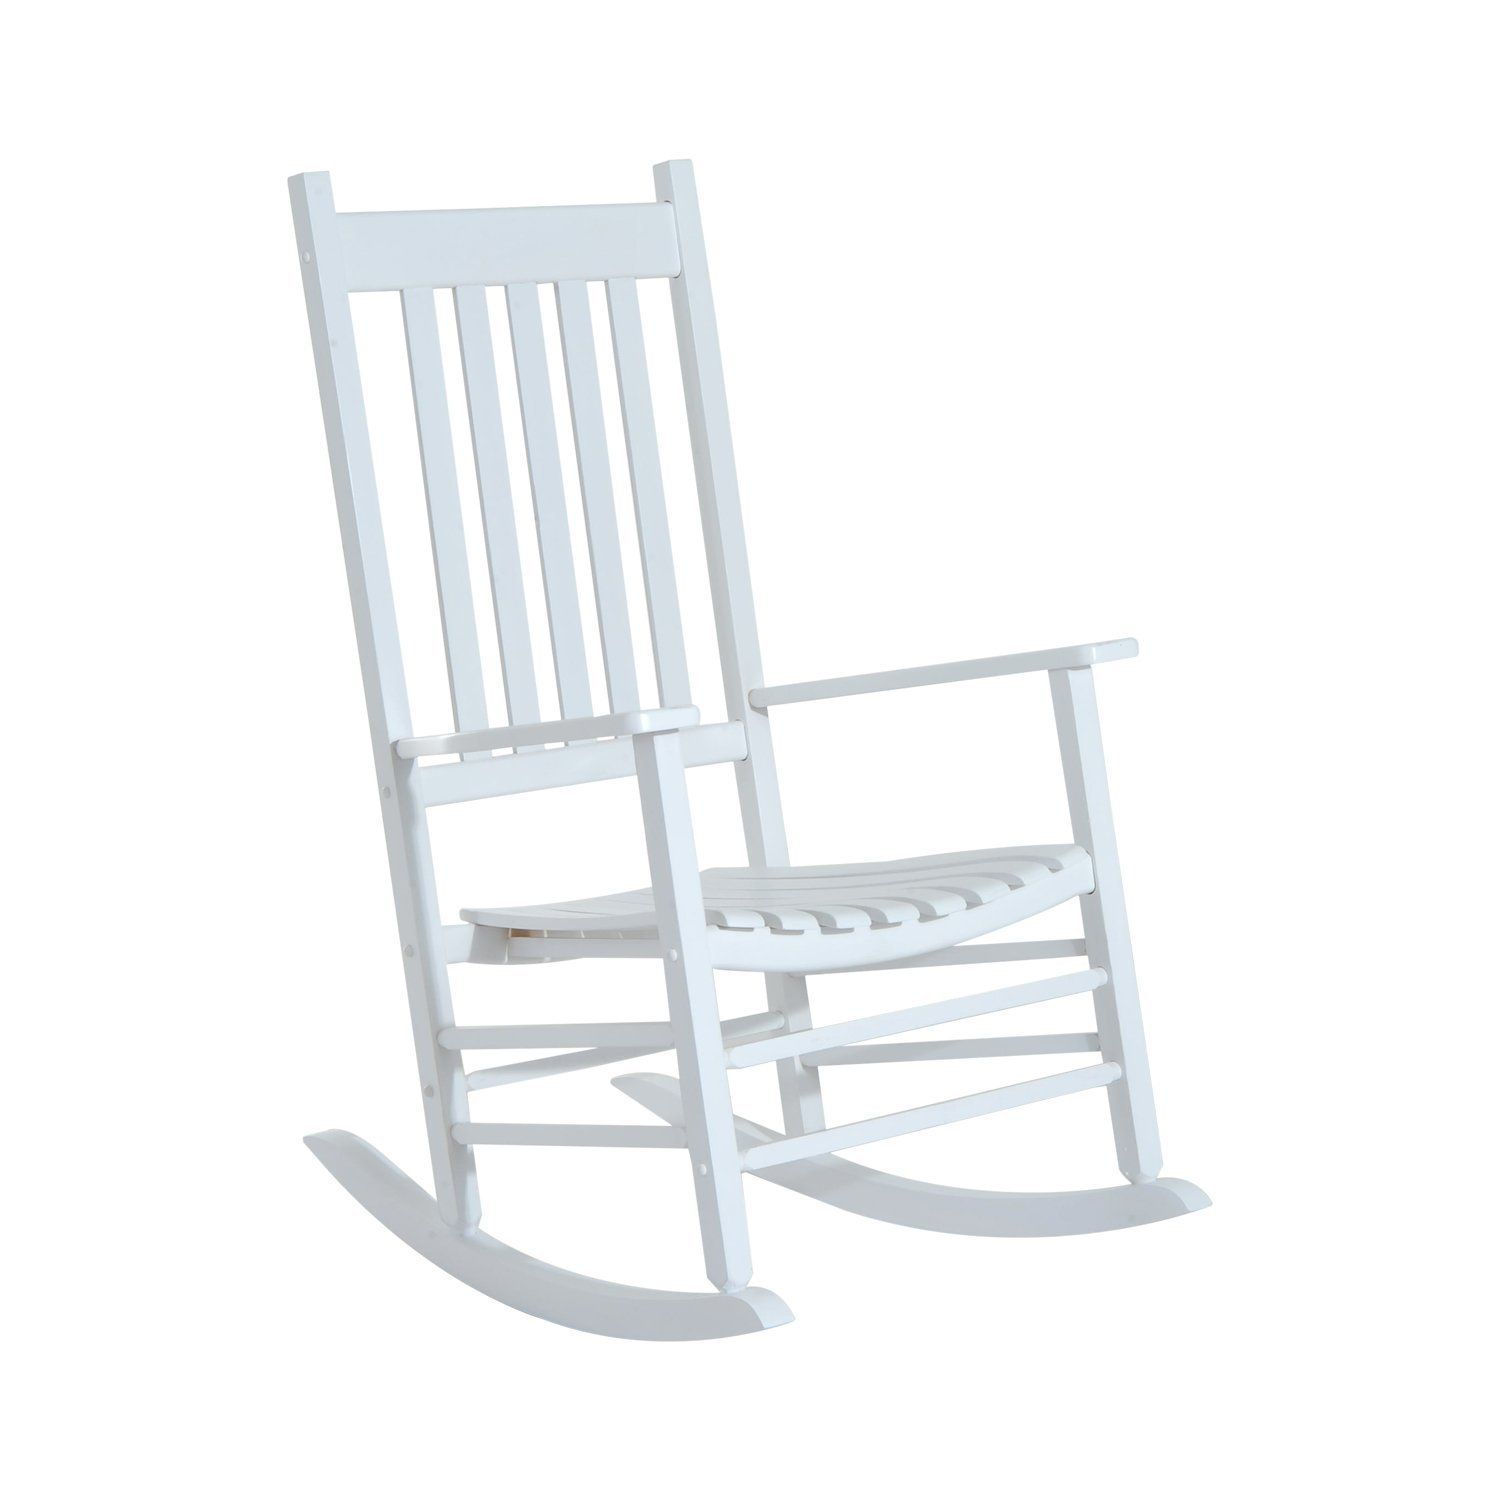 Outsunny Porch Rocking Chair – Outdoor Patio Wooden Rocker – White Throughout White Wood Rocking Chairs (View 13 of 20)